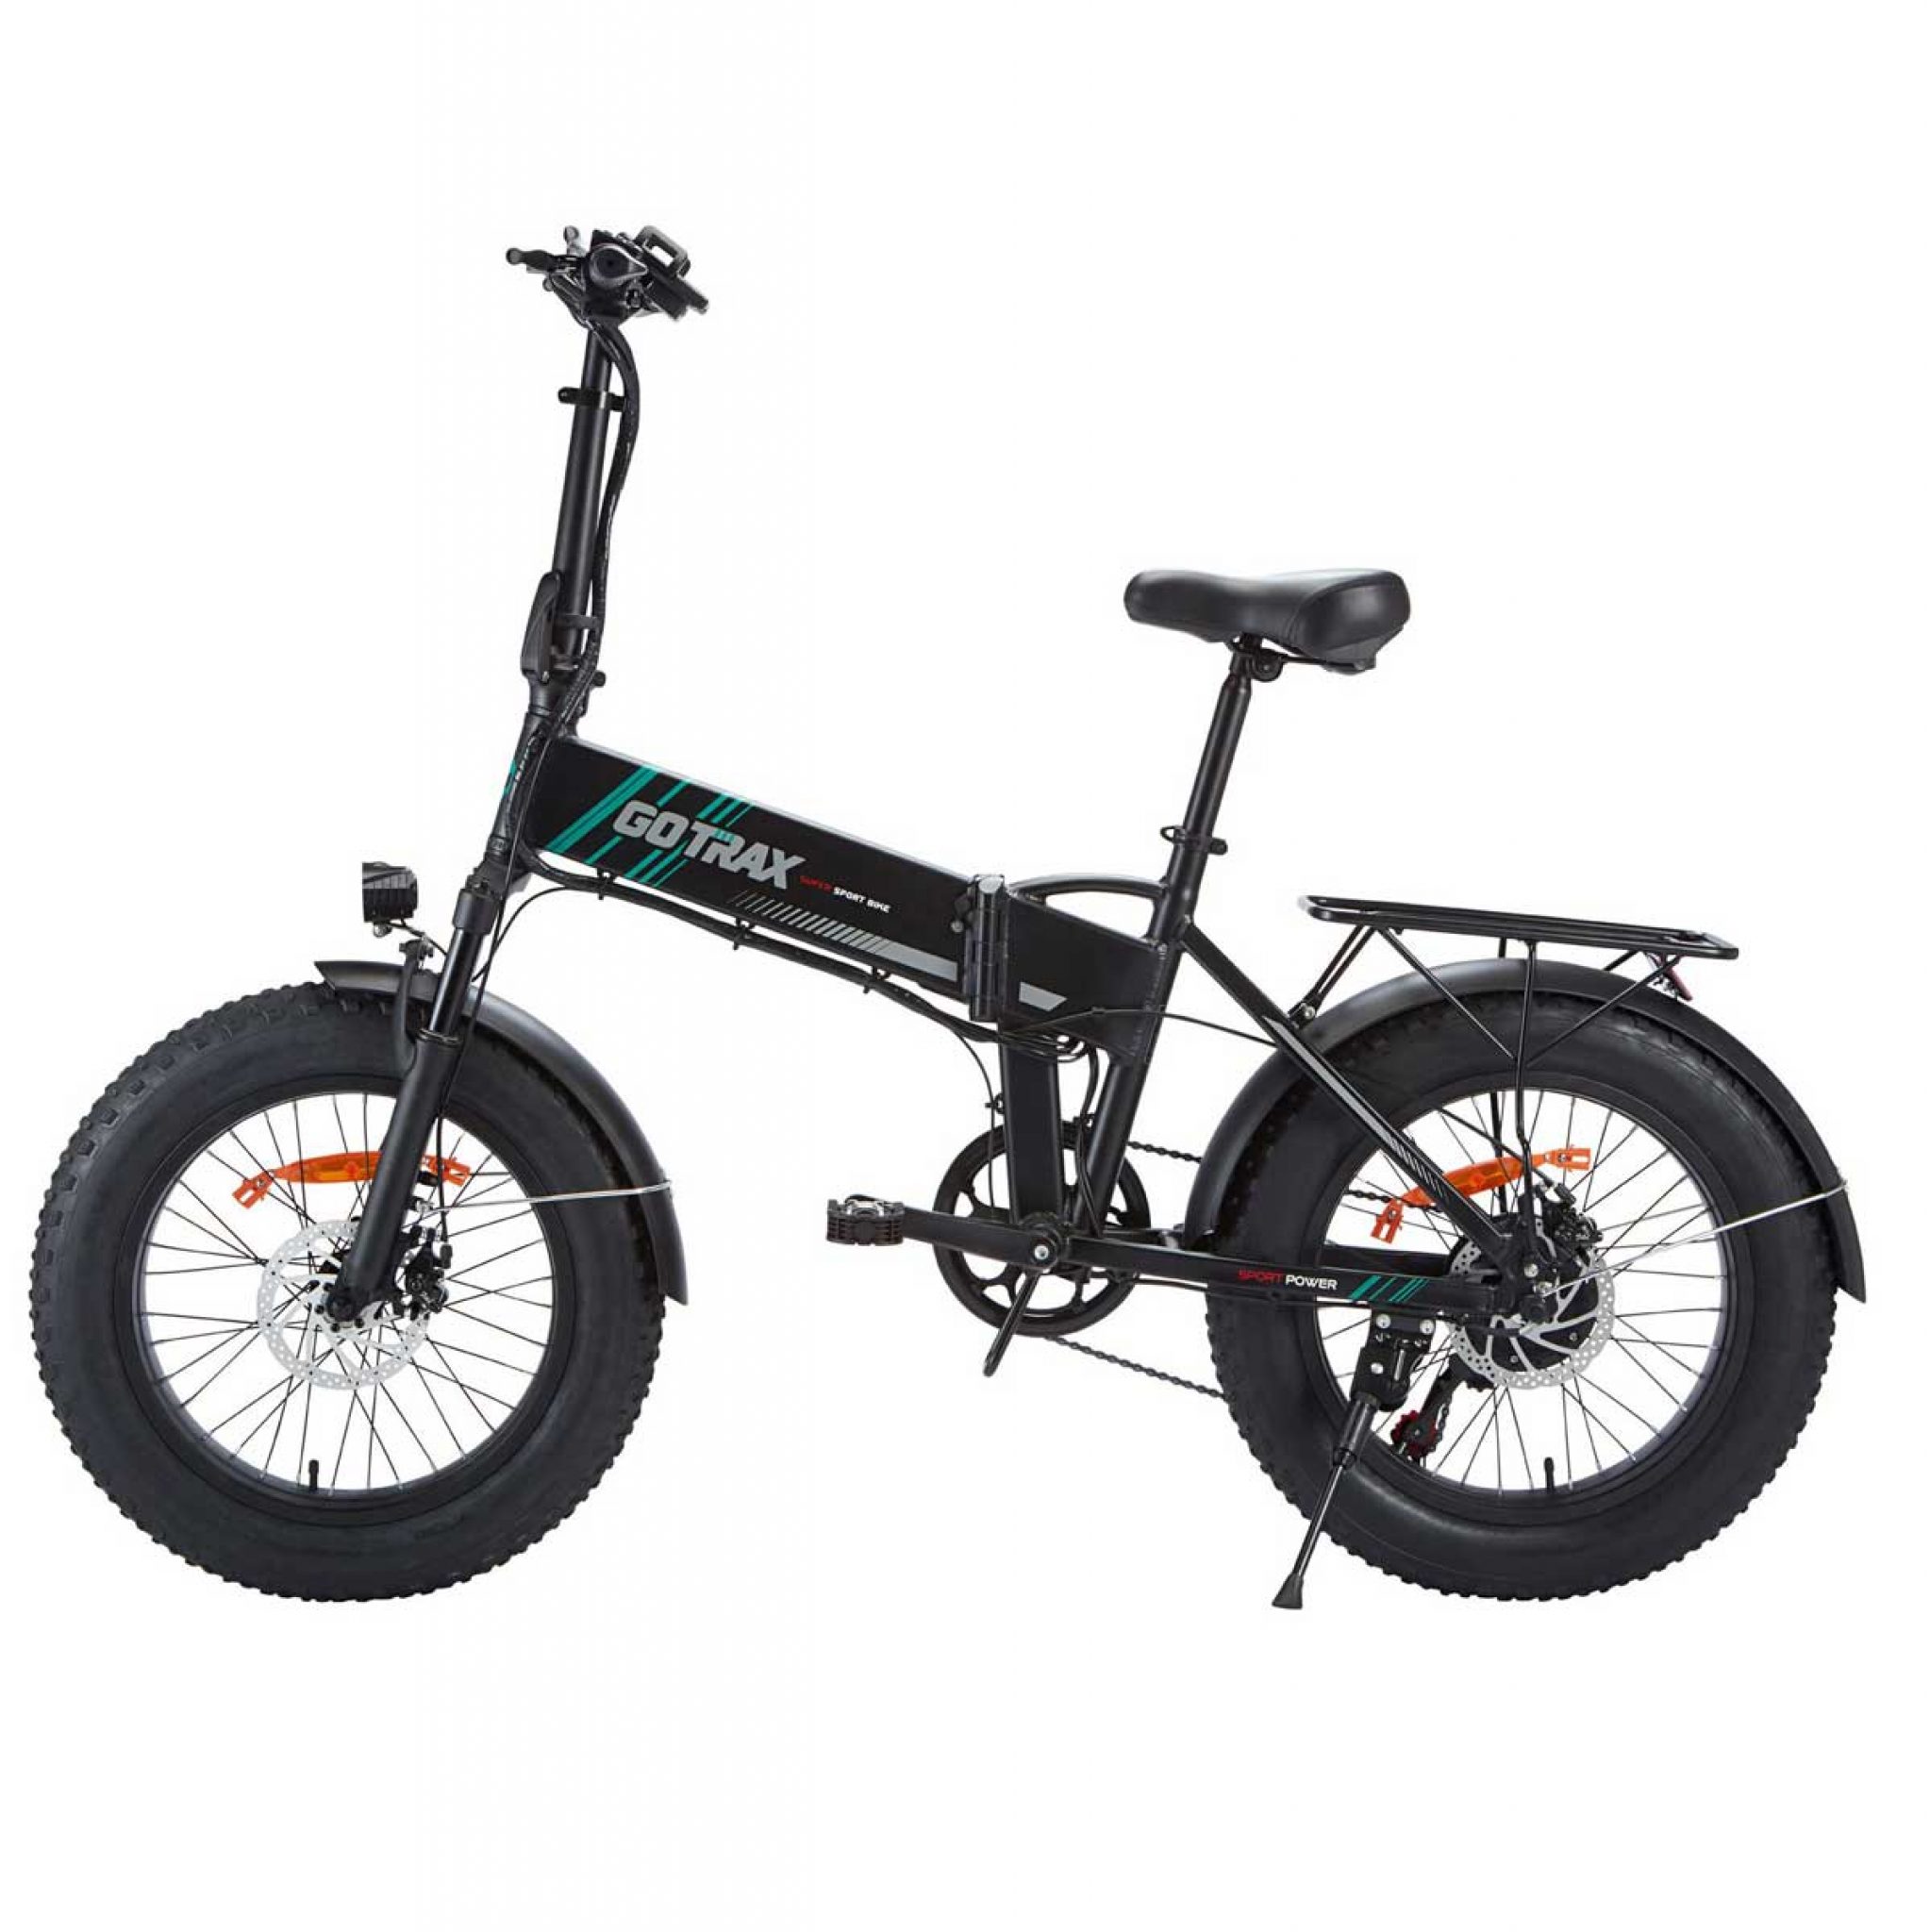 GOTRAX EBE4 FAT TIRE ELECTRIC BIKE 20" | We Are The Cyclists